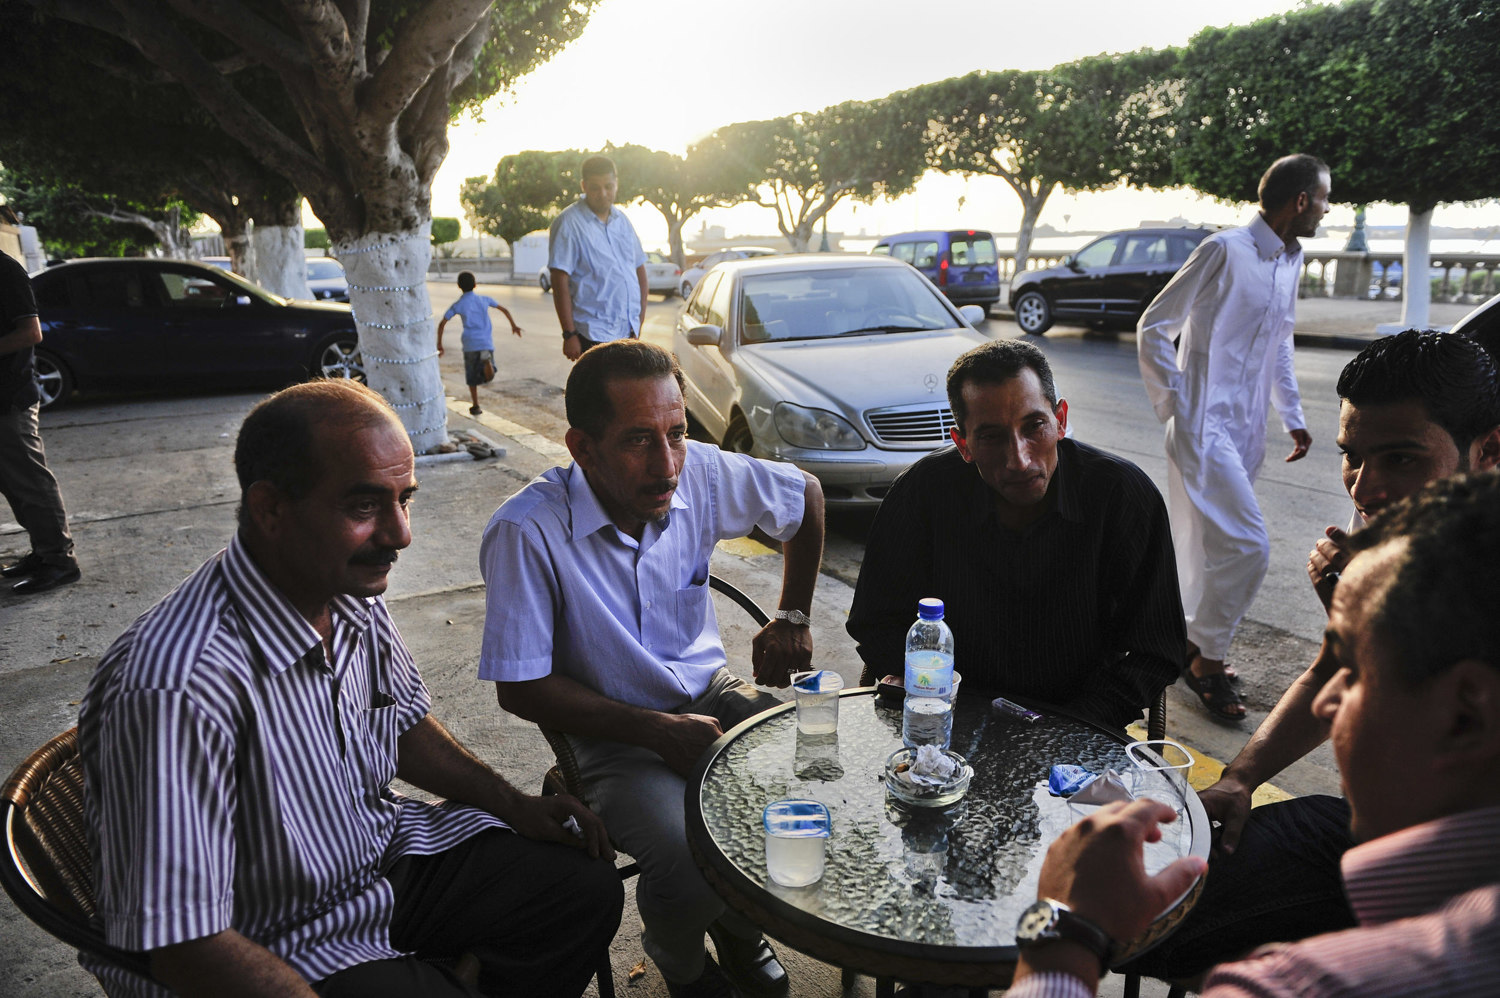  A group of men debate politics outside of a coffee house on the eve of the country's first election since the end of the Gaddafi rule, July 6th, 2012. After 42 years of Muammar Gaddafi's reign, Libyans are participating in the first democratic elect